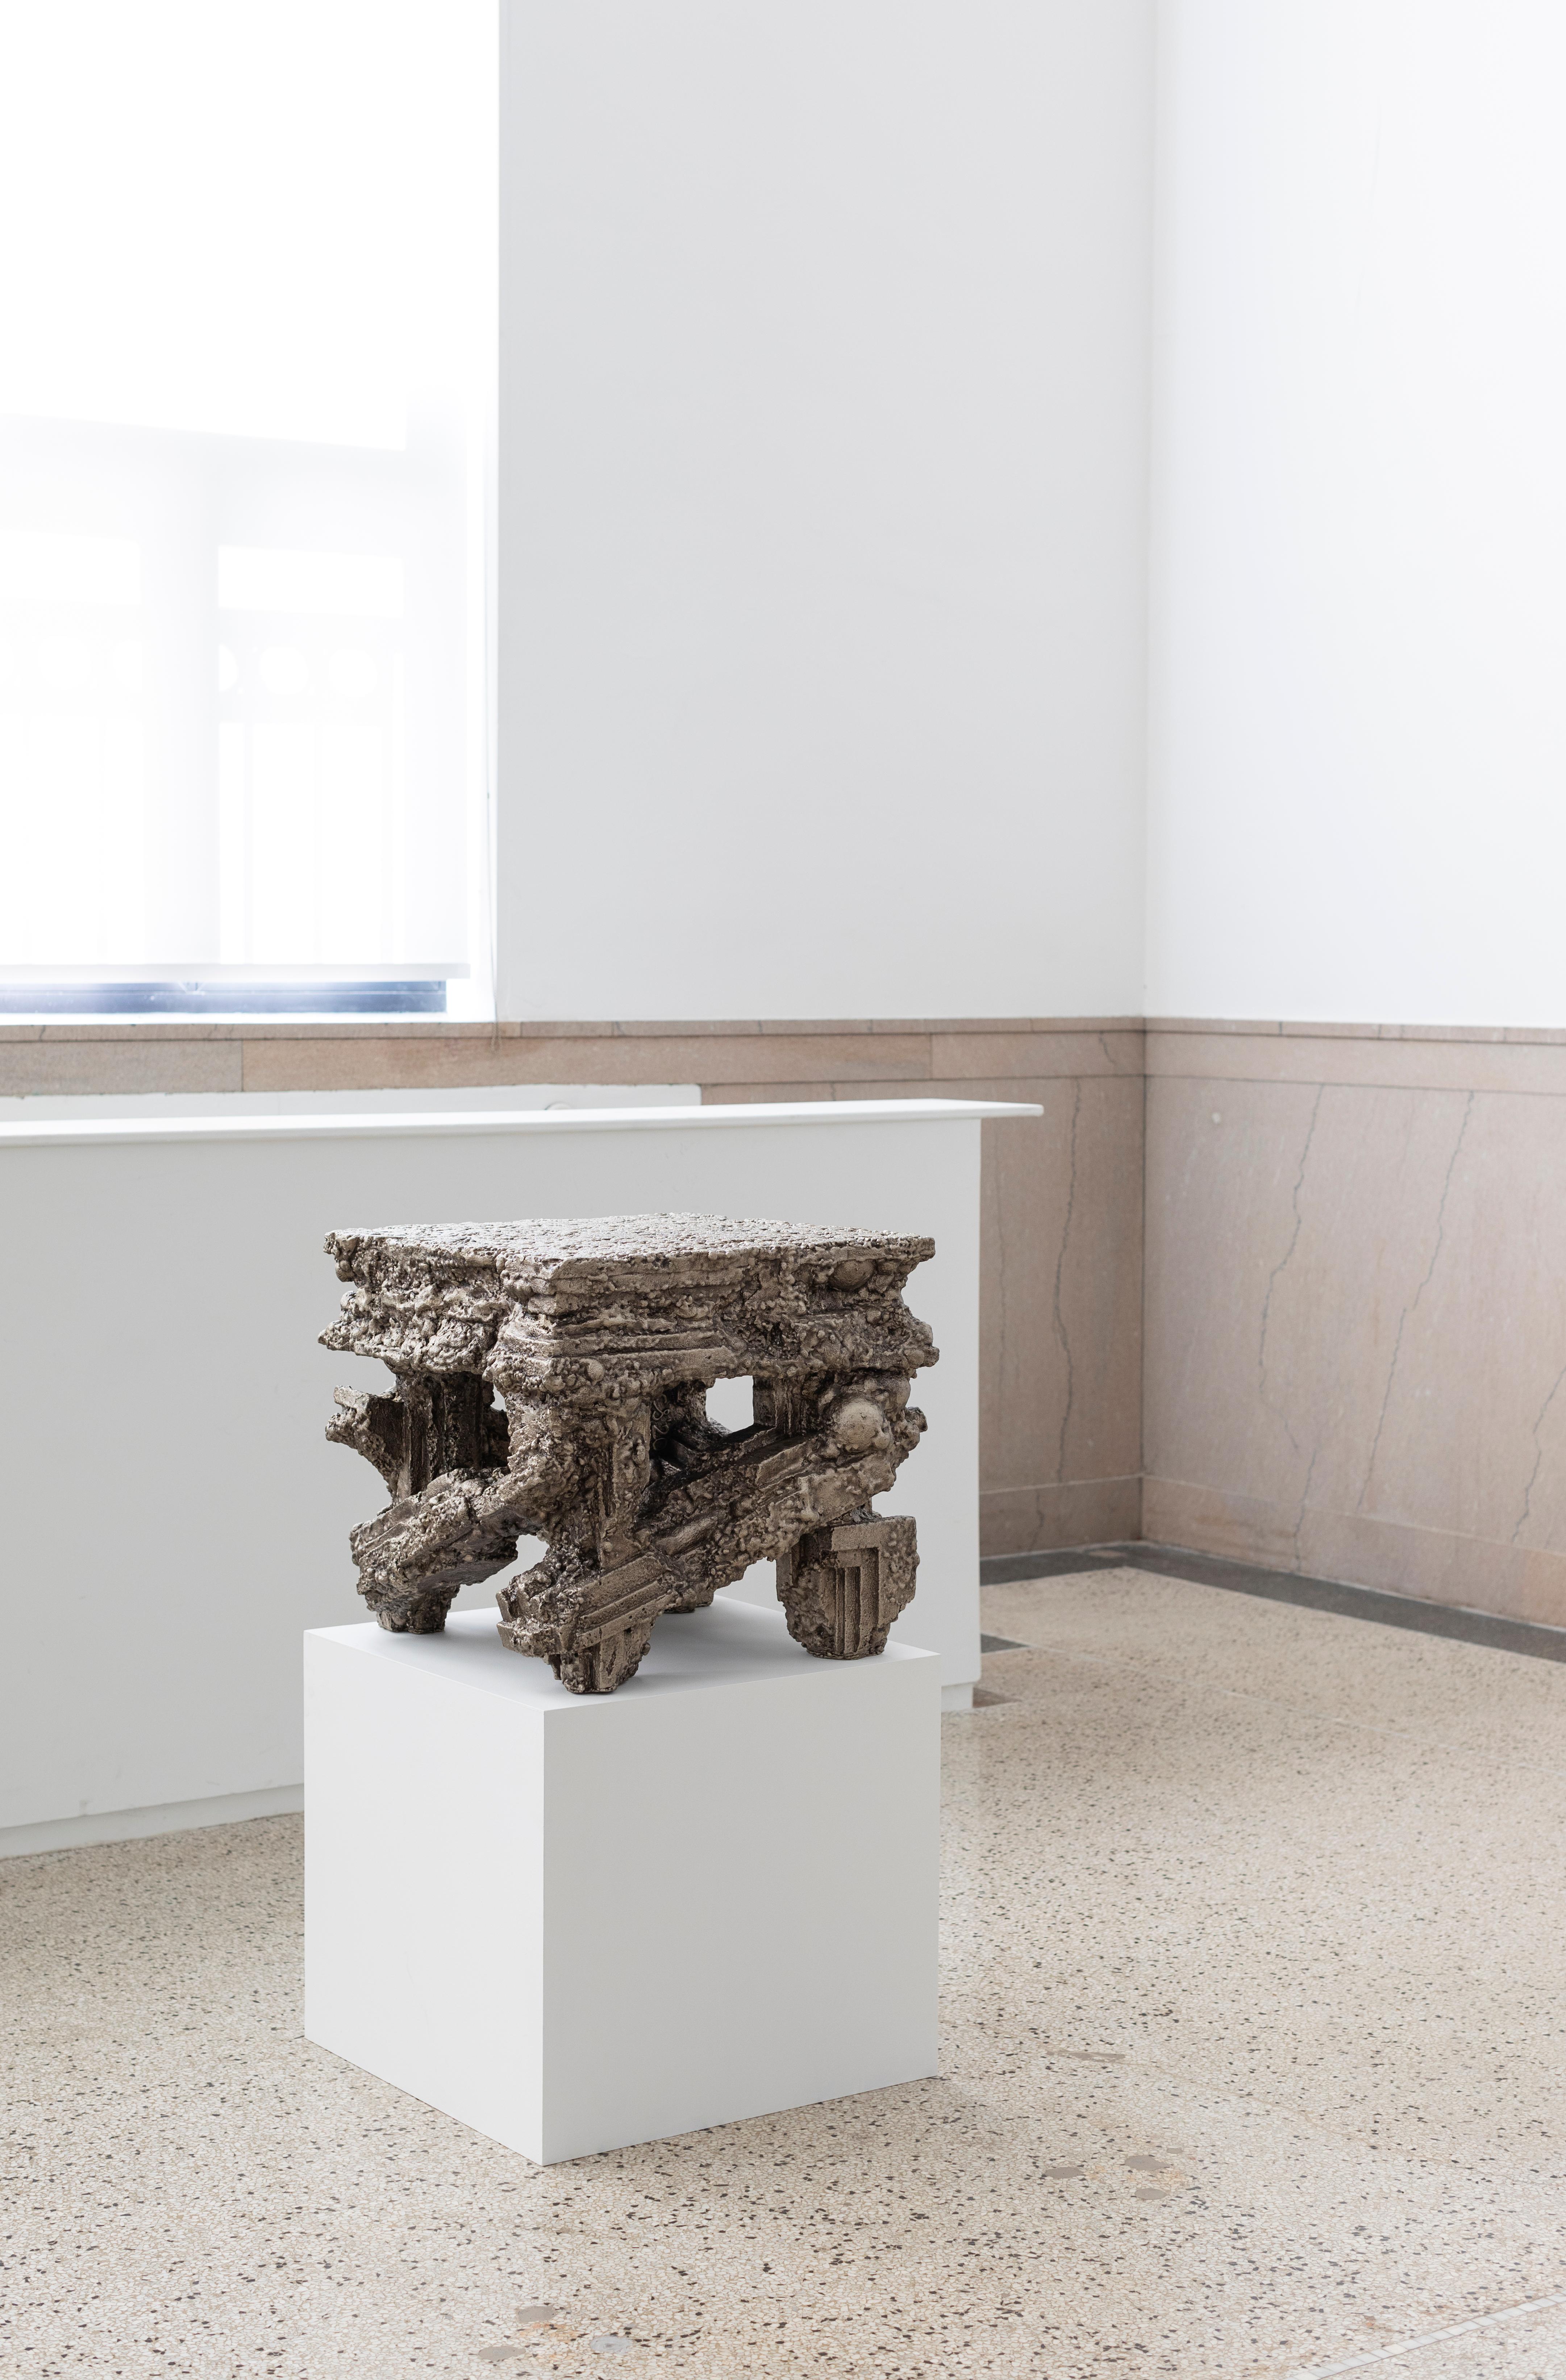 Chris Schanck [American, b. 1975]
Ore Table, 2020
Cast white bronze
19.5 x 22 x 22 inches
50 x 56 x 56 cm
Edition of 8

Designer Chris Schanck’s work embraces the tension between dilapidation and opulence, asking us to find unconventional